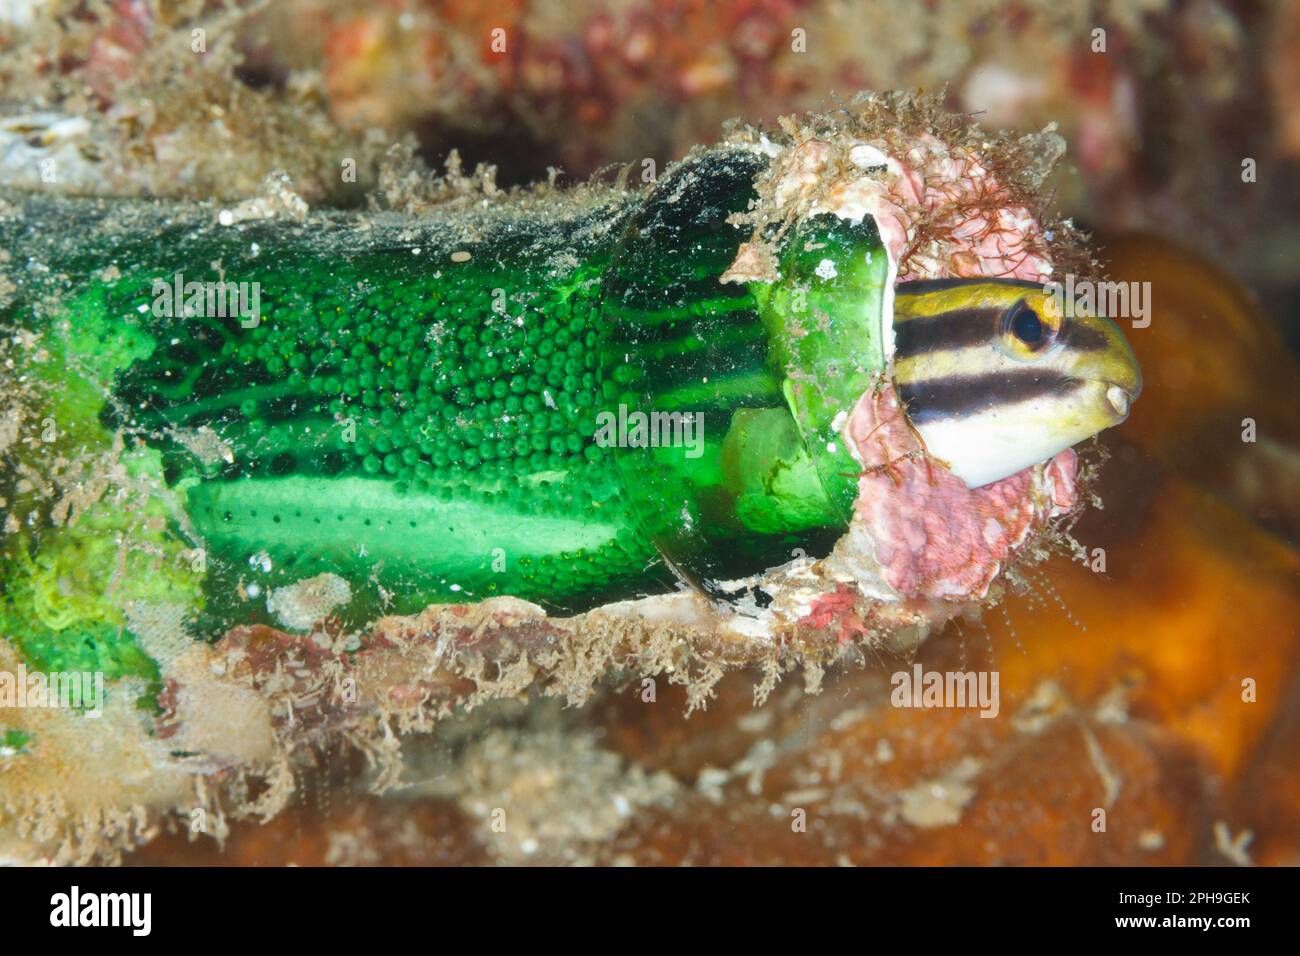 Striped fang blenny (Meiacanthus grammistes) living inside a bottle where its eggs can be seen.  Lembeh Strait, North Sulawesi, Indonesia. Stock Photo